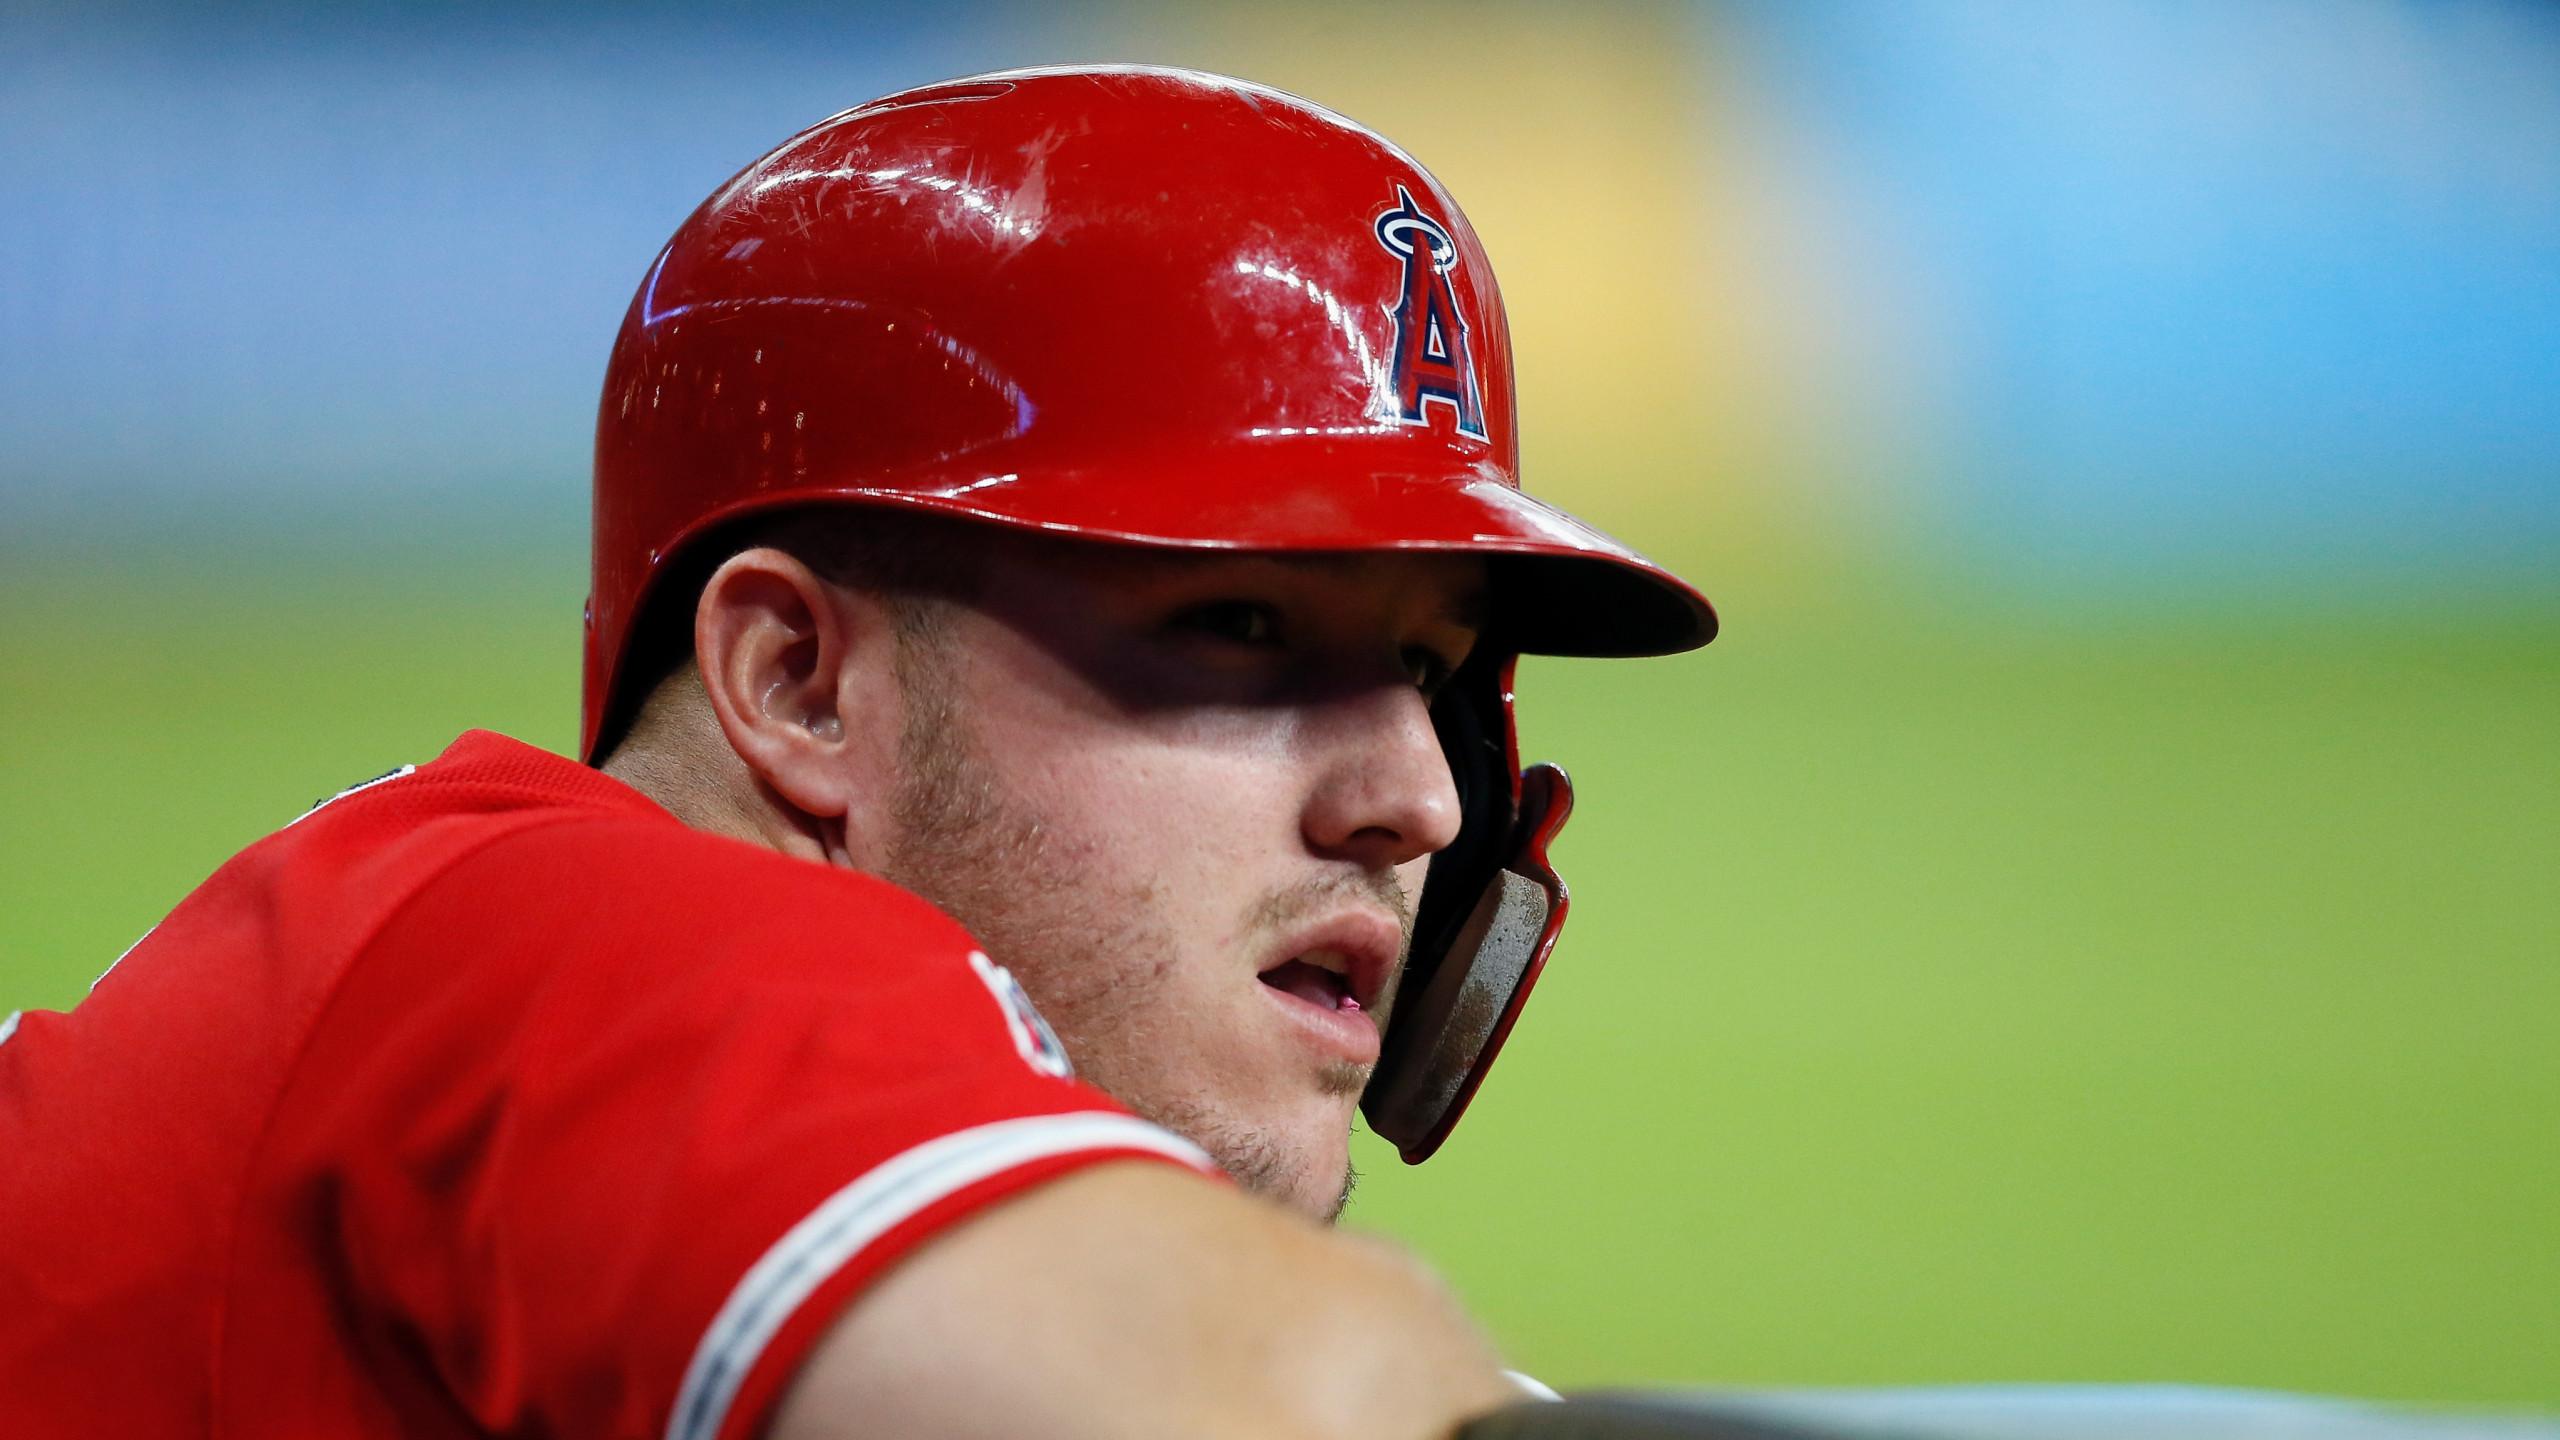 Mike Trout Finalizing 12 Year, $430 Million Deal With Los